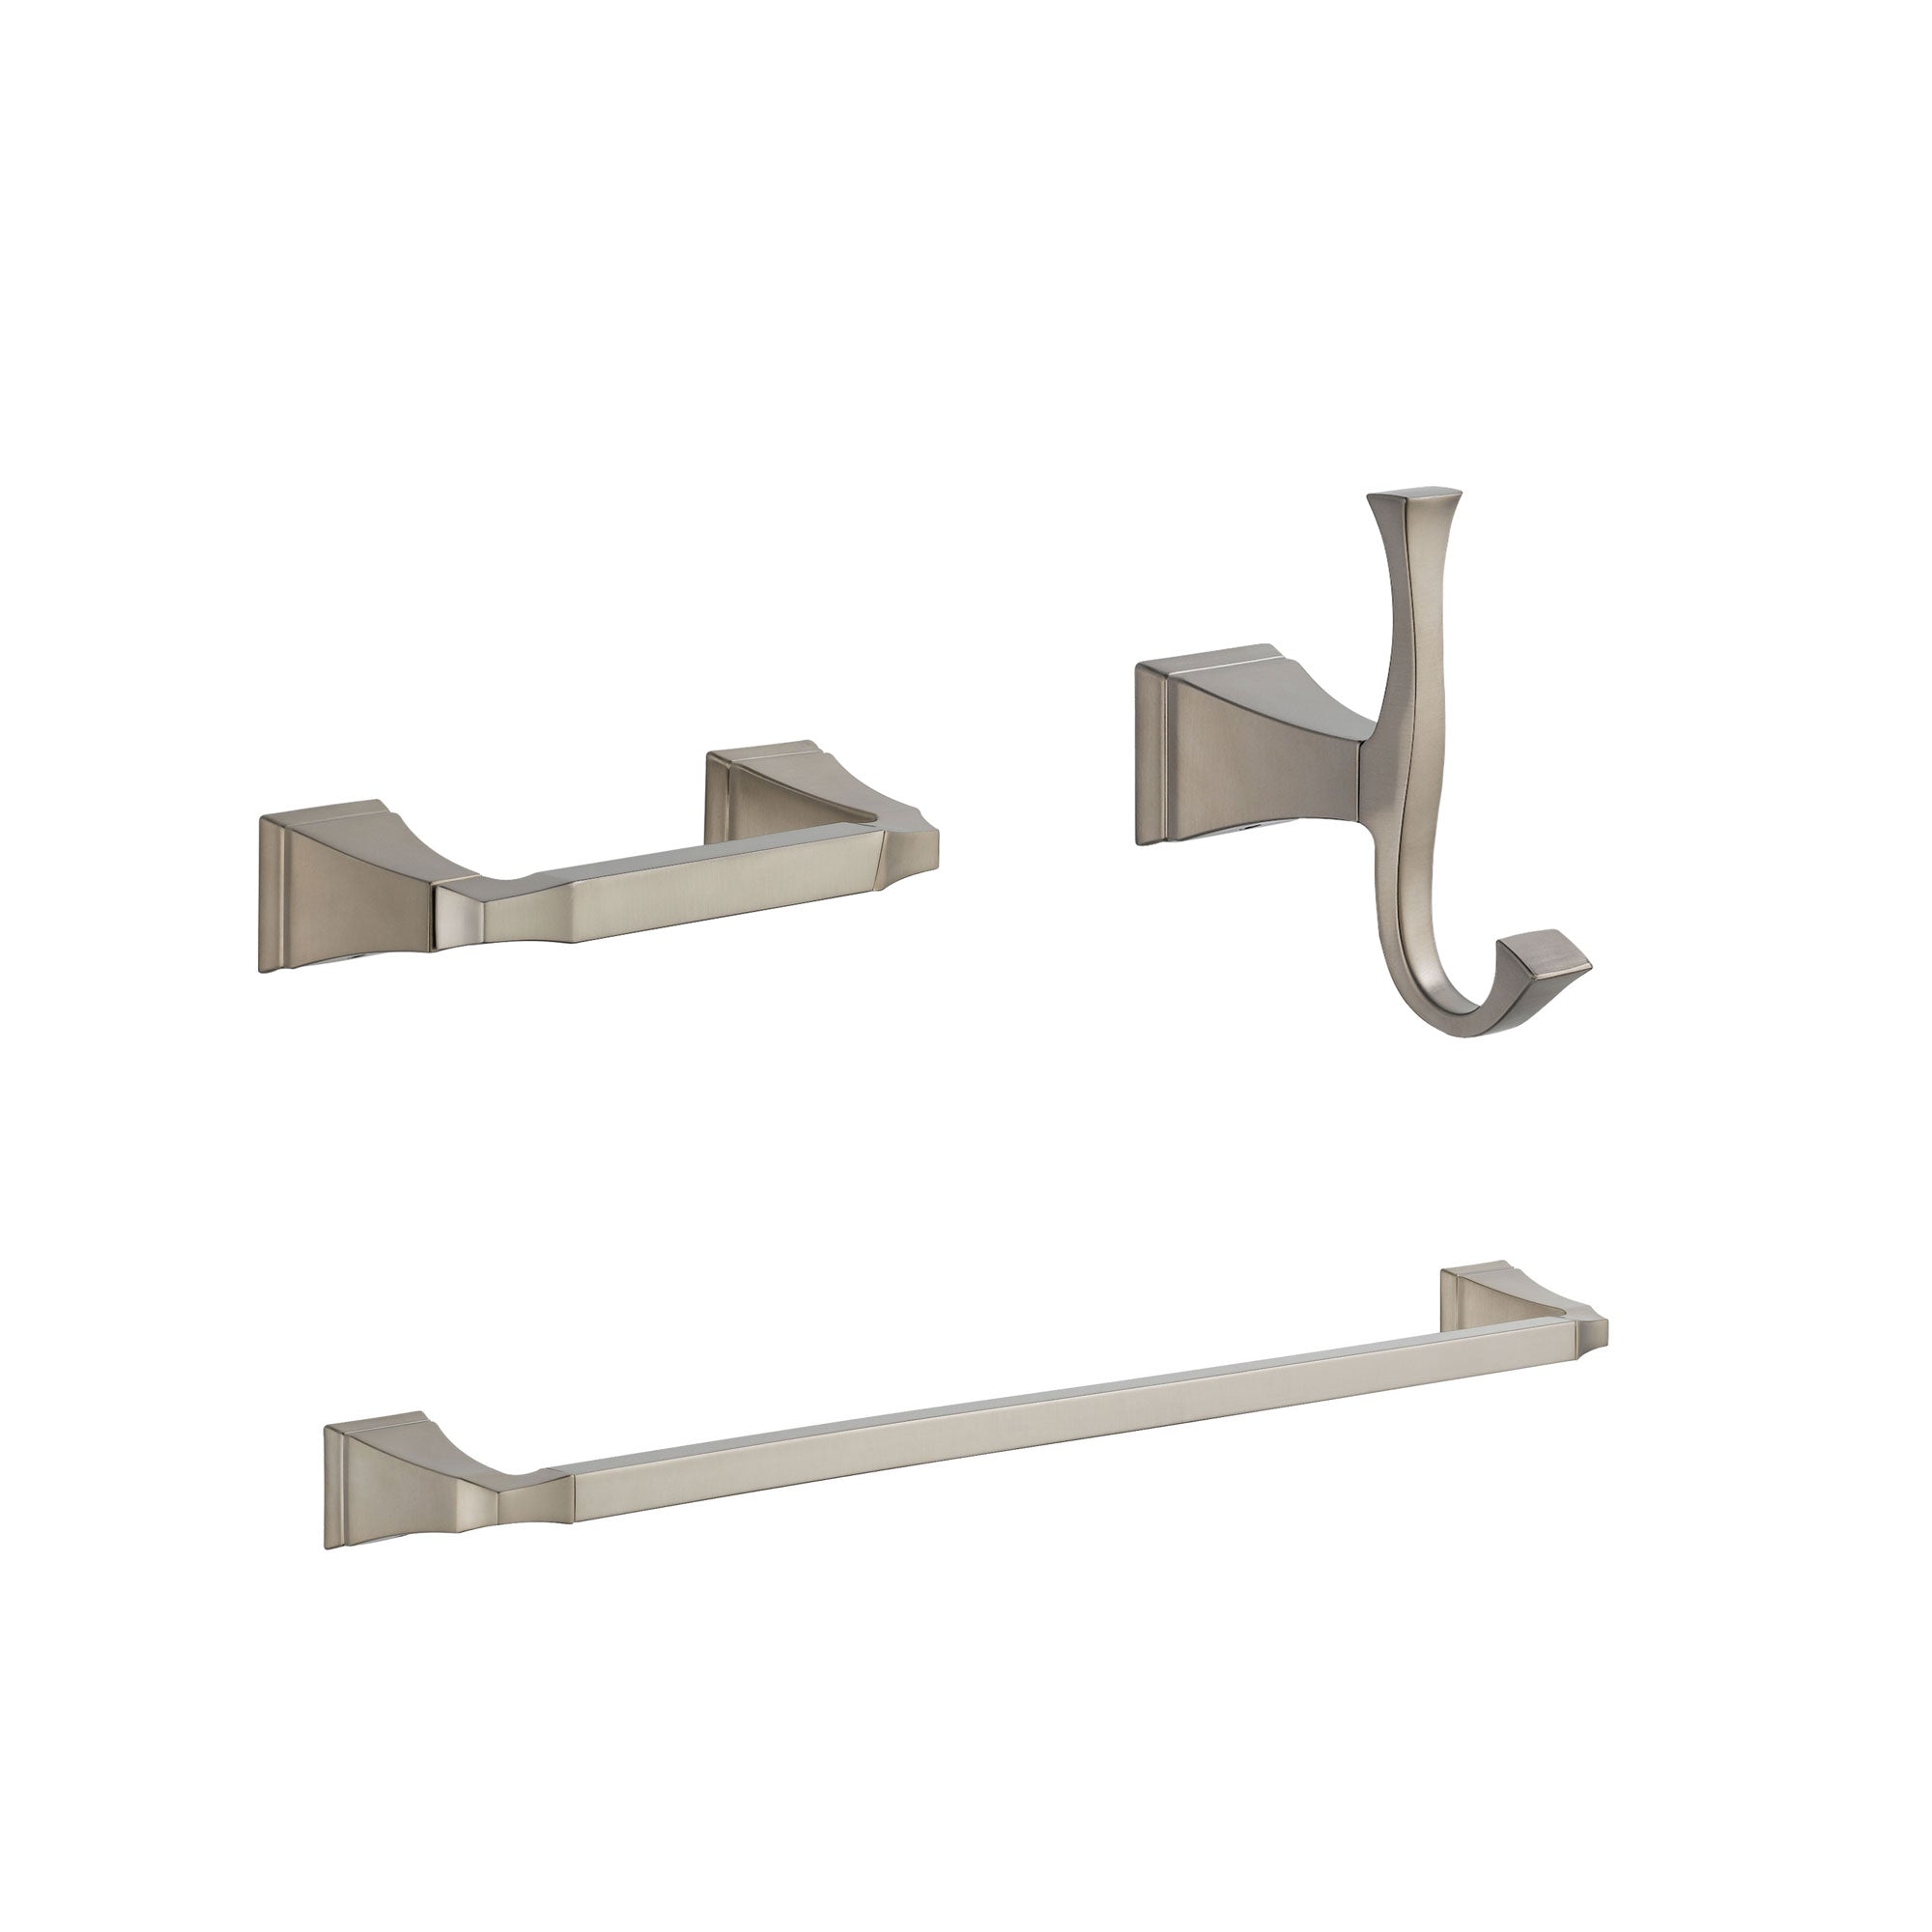 Delta Dryden Stainless Steel Finish BASICS Bathroom Accessory Set Includes: 24" Towel Bar, Toilet Paper Holder, and Robe Hook D10034AP